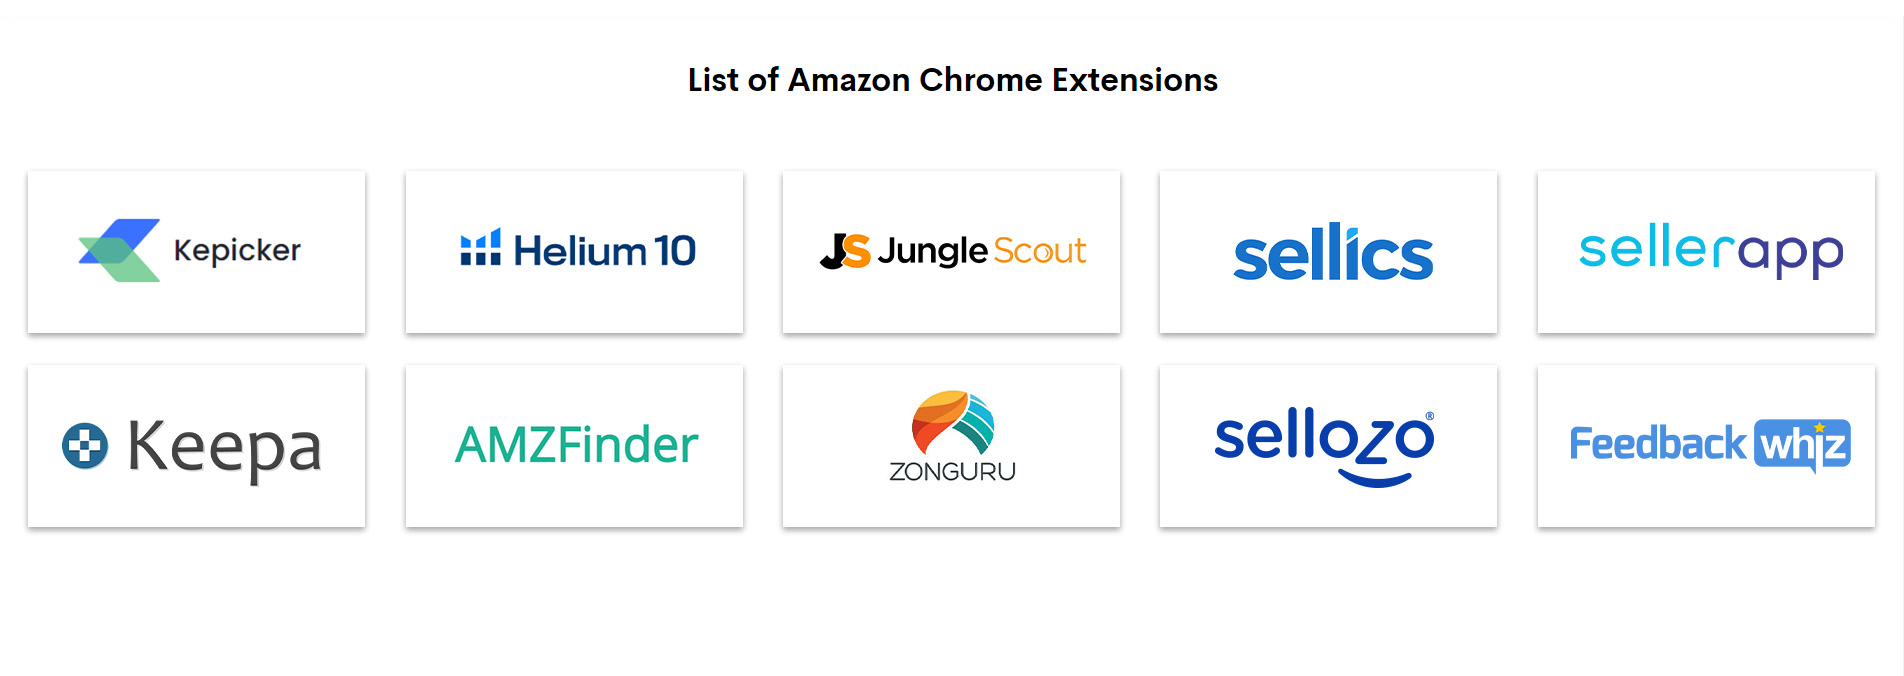 List of Amazon Chrome Extensions